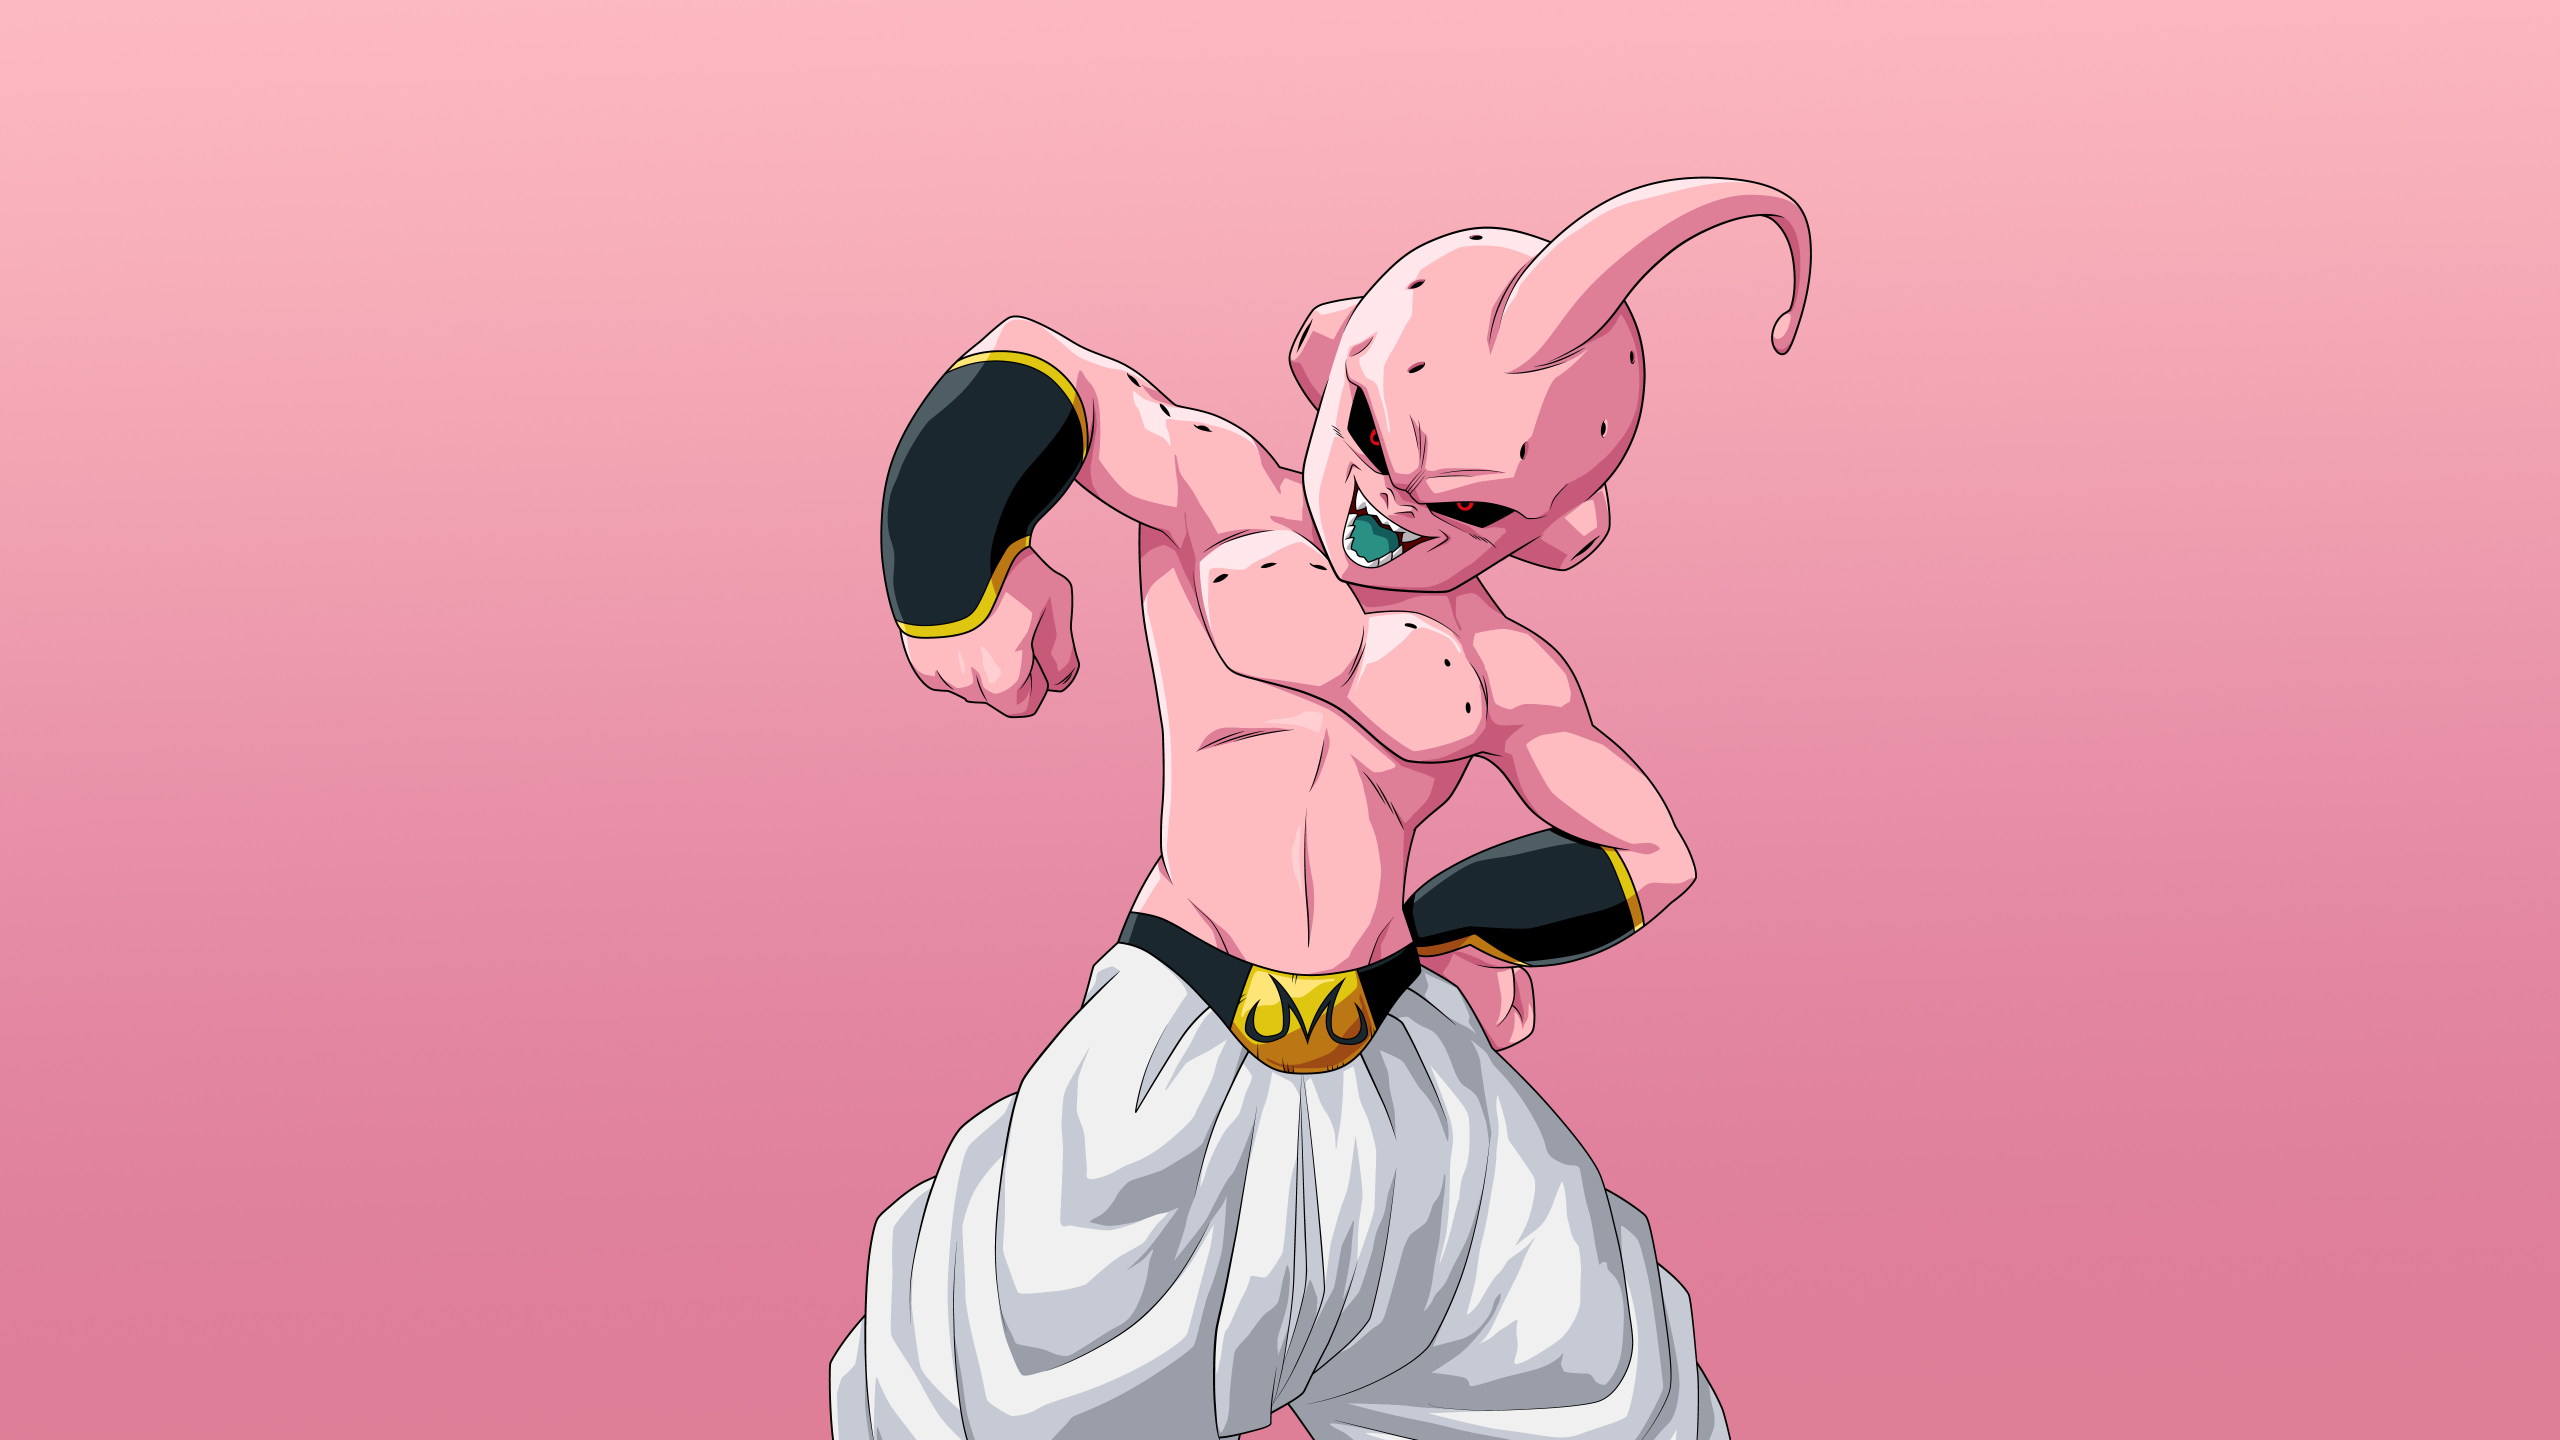 2560x1440 Majin Buu In Dragon Ball Z Kakarot 1440p Resolution Wallpaper Hd Games 4k Wallpapers Images Photos And Background Wallpapers Den